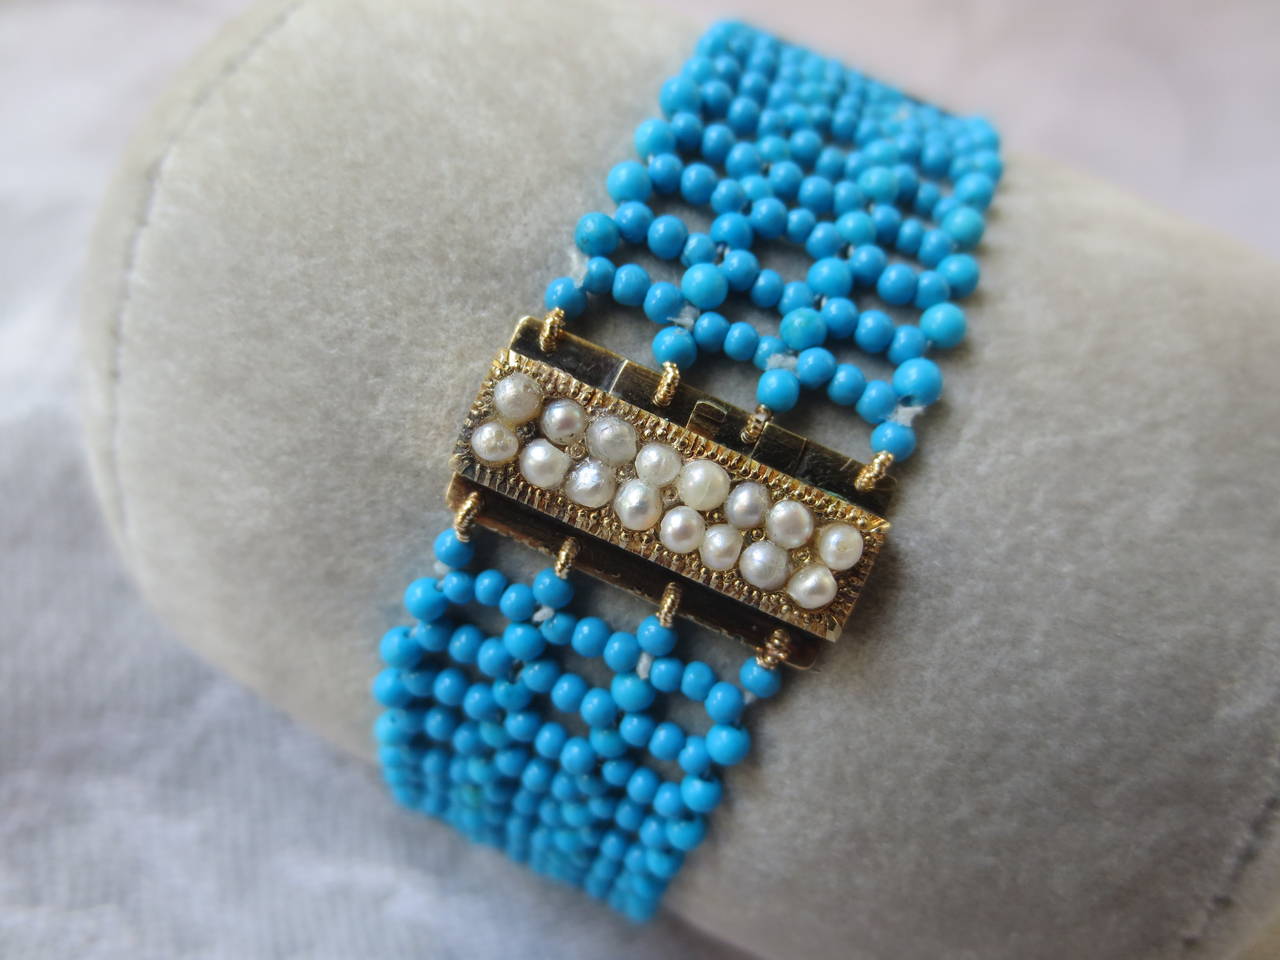 Intricately hand woven turquoise bracelet is unique and elegant. Accented with an antique gold and seed pearl centerpiece clasp, this is a classic and timeless piece.  The band is woven with 1.5 mm turquoise beads and the clasp is made of 14k gold